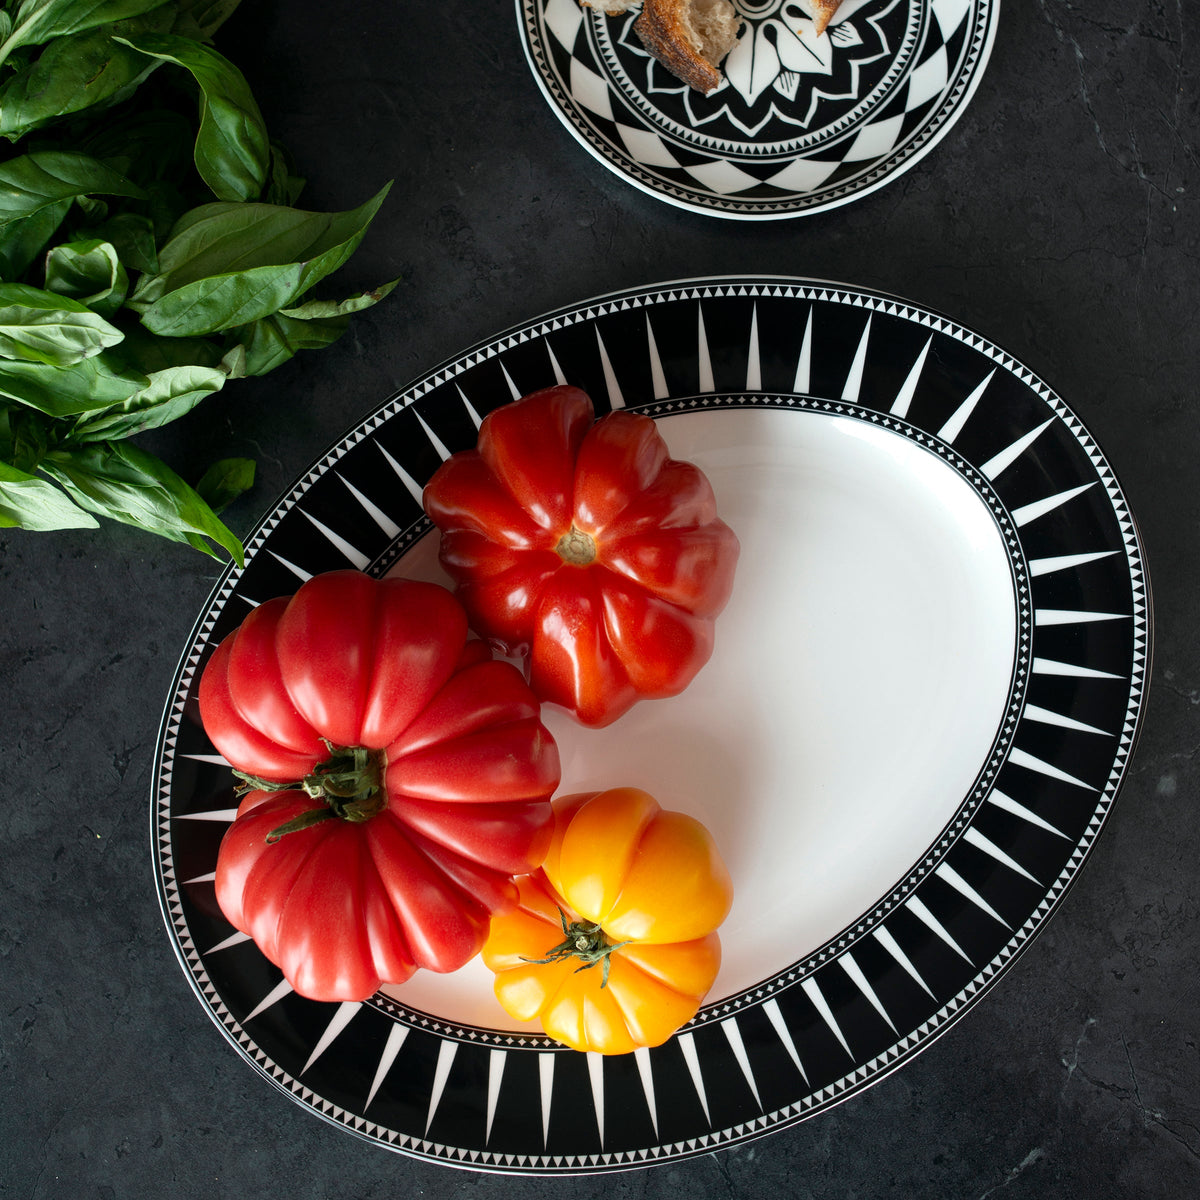 Three heirloom tomatoes, two red and one yellow, rest on a Caskata Artisanal Home Marrakech Oval Rimmed Platter with fresh basil leaves on the side.